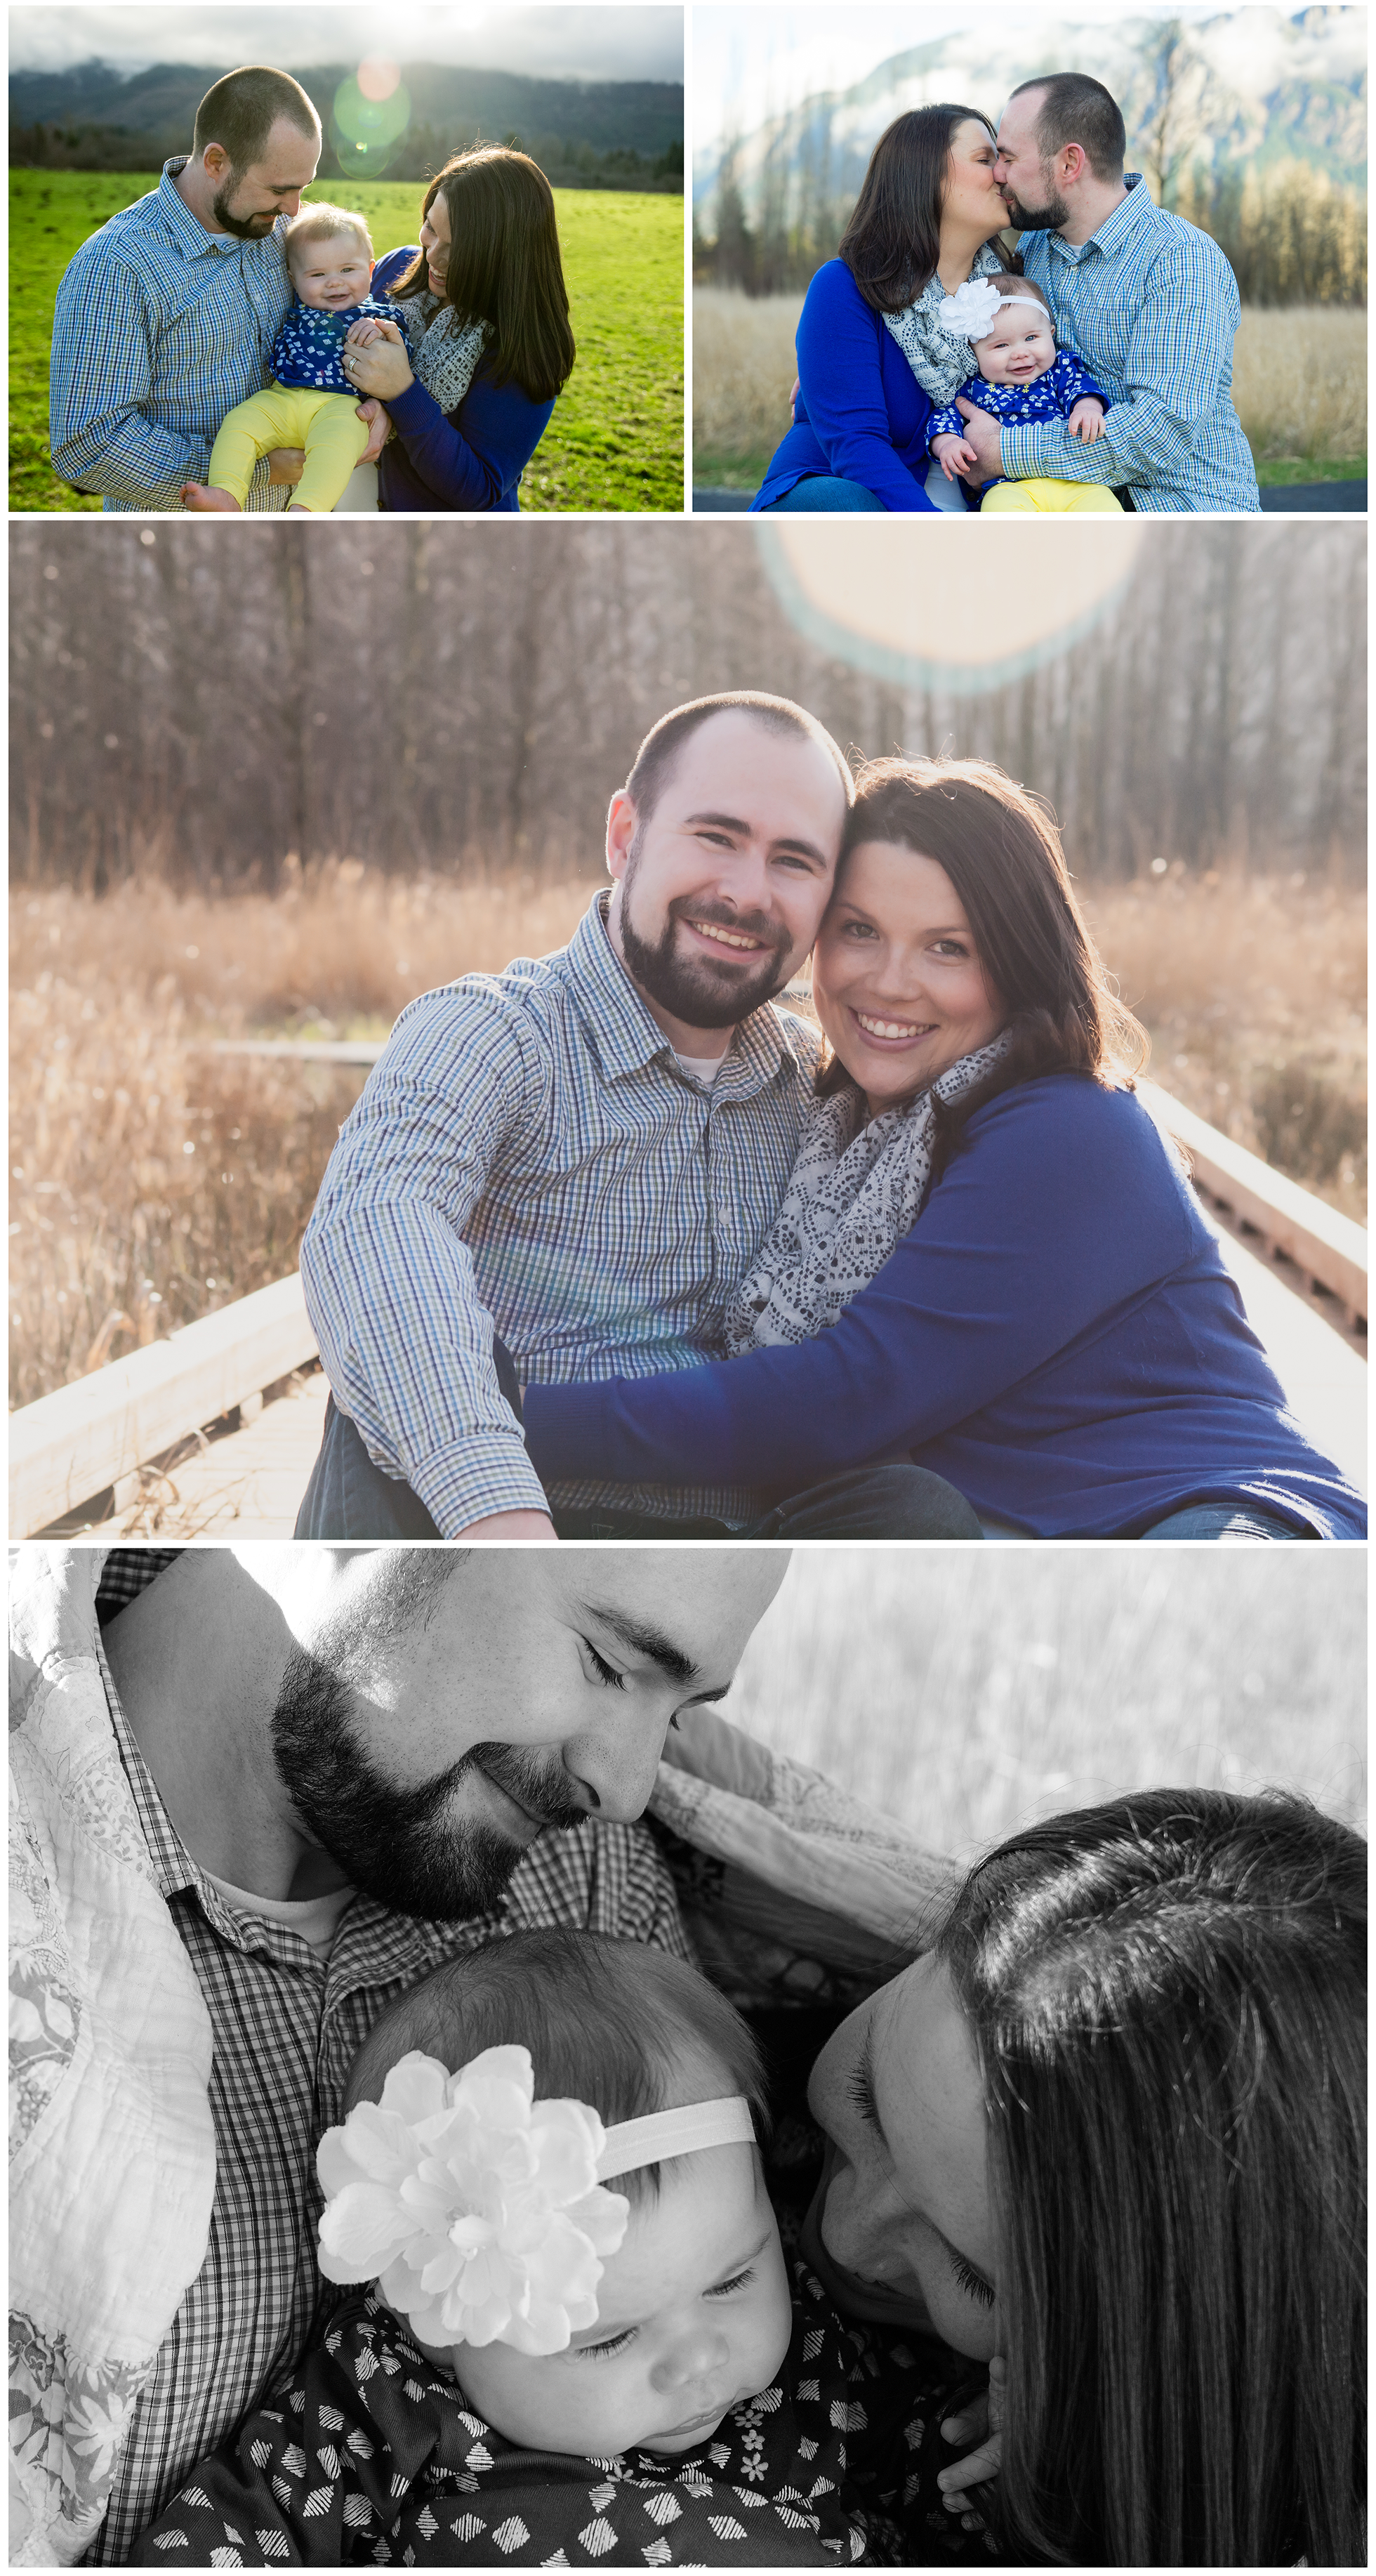 Sawtelle-Darby Family Session {by Rusted Van Photography}